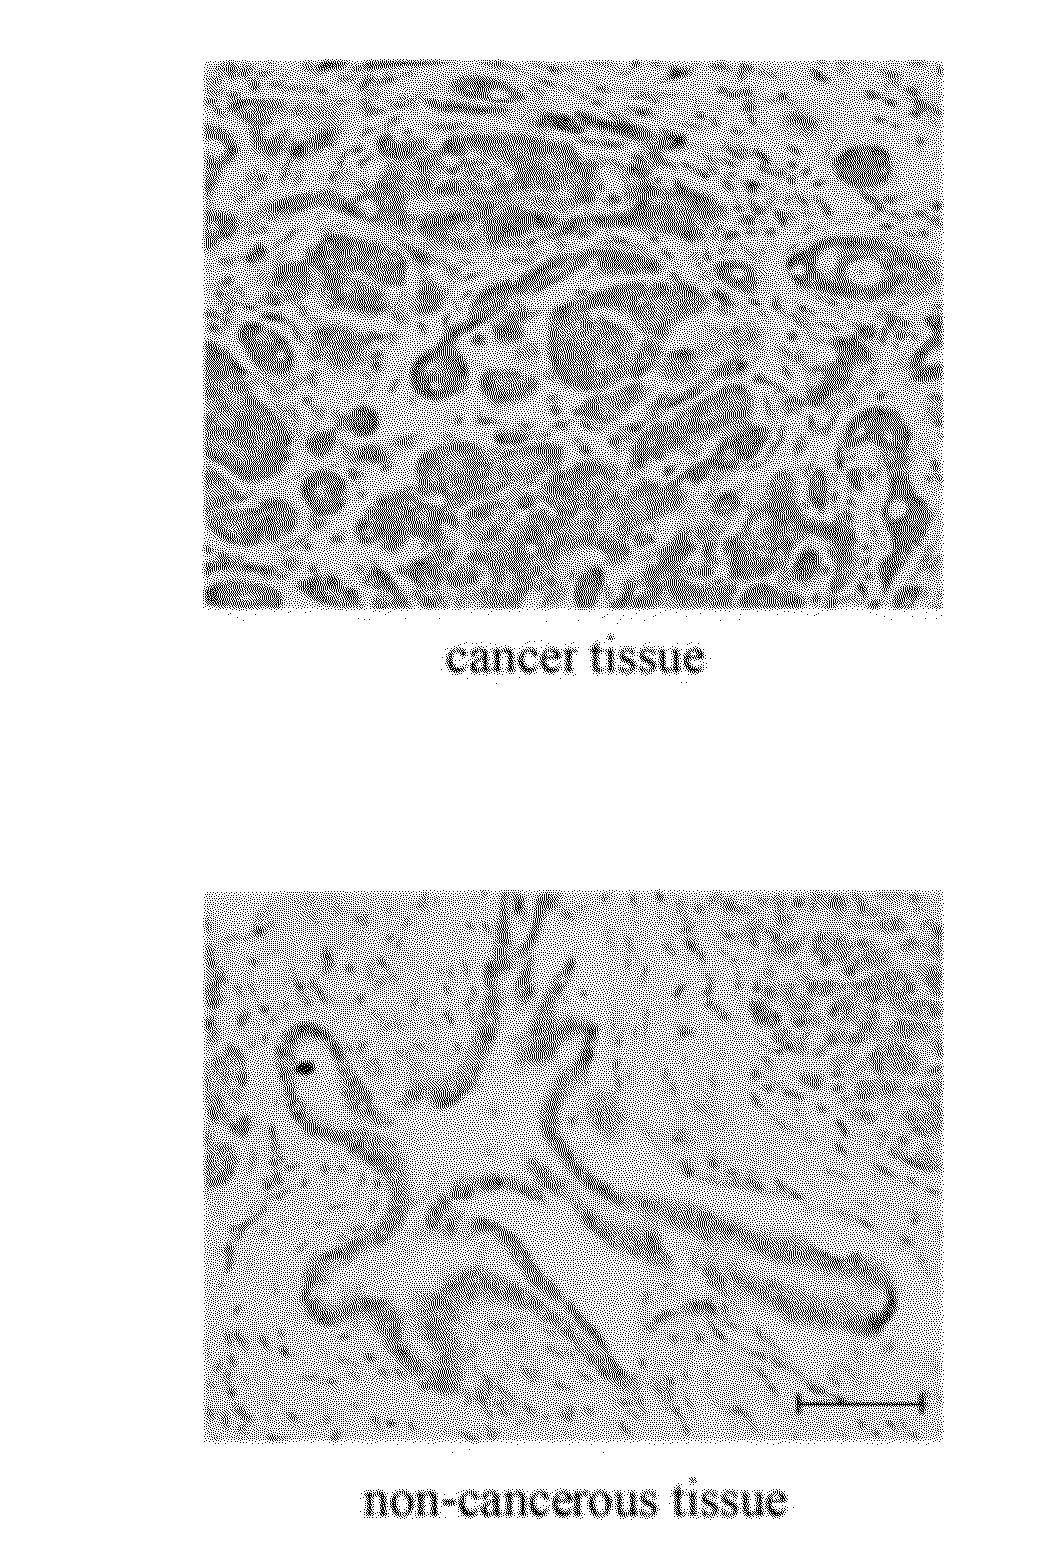 Serological marker for detecting pancreatic cancer and a method for using the serological marker